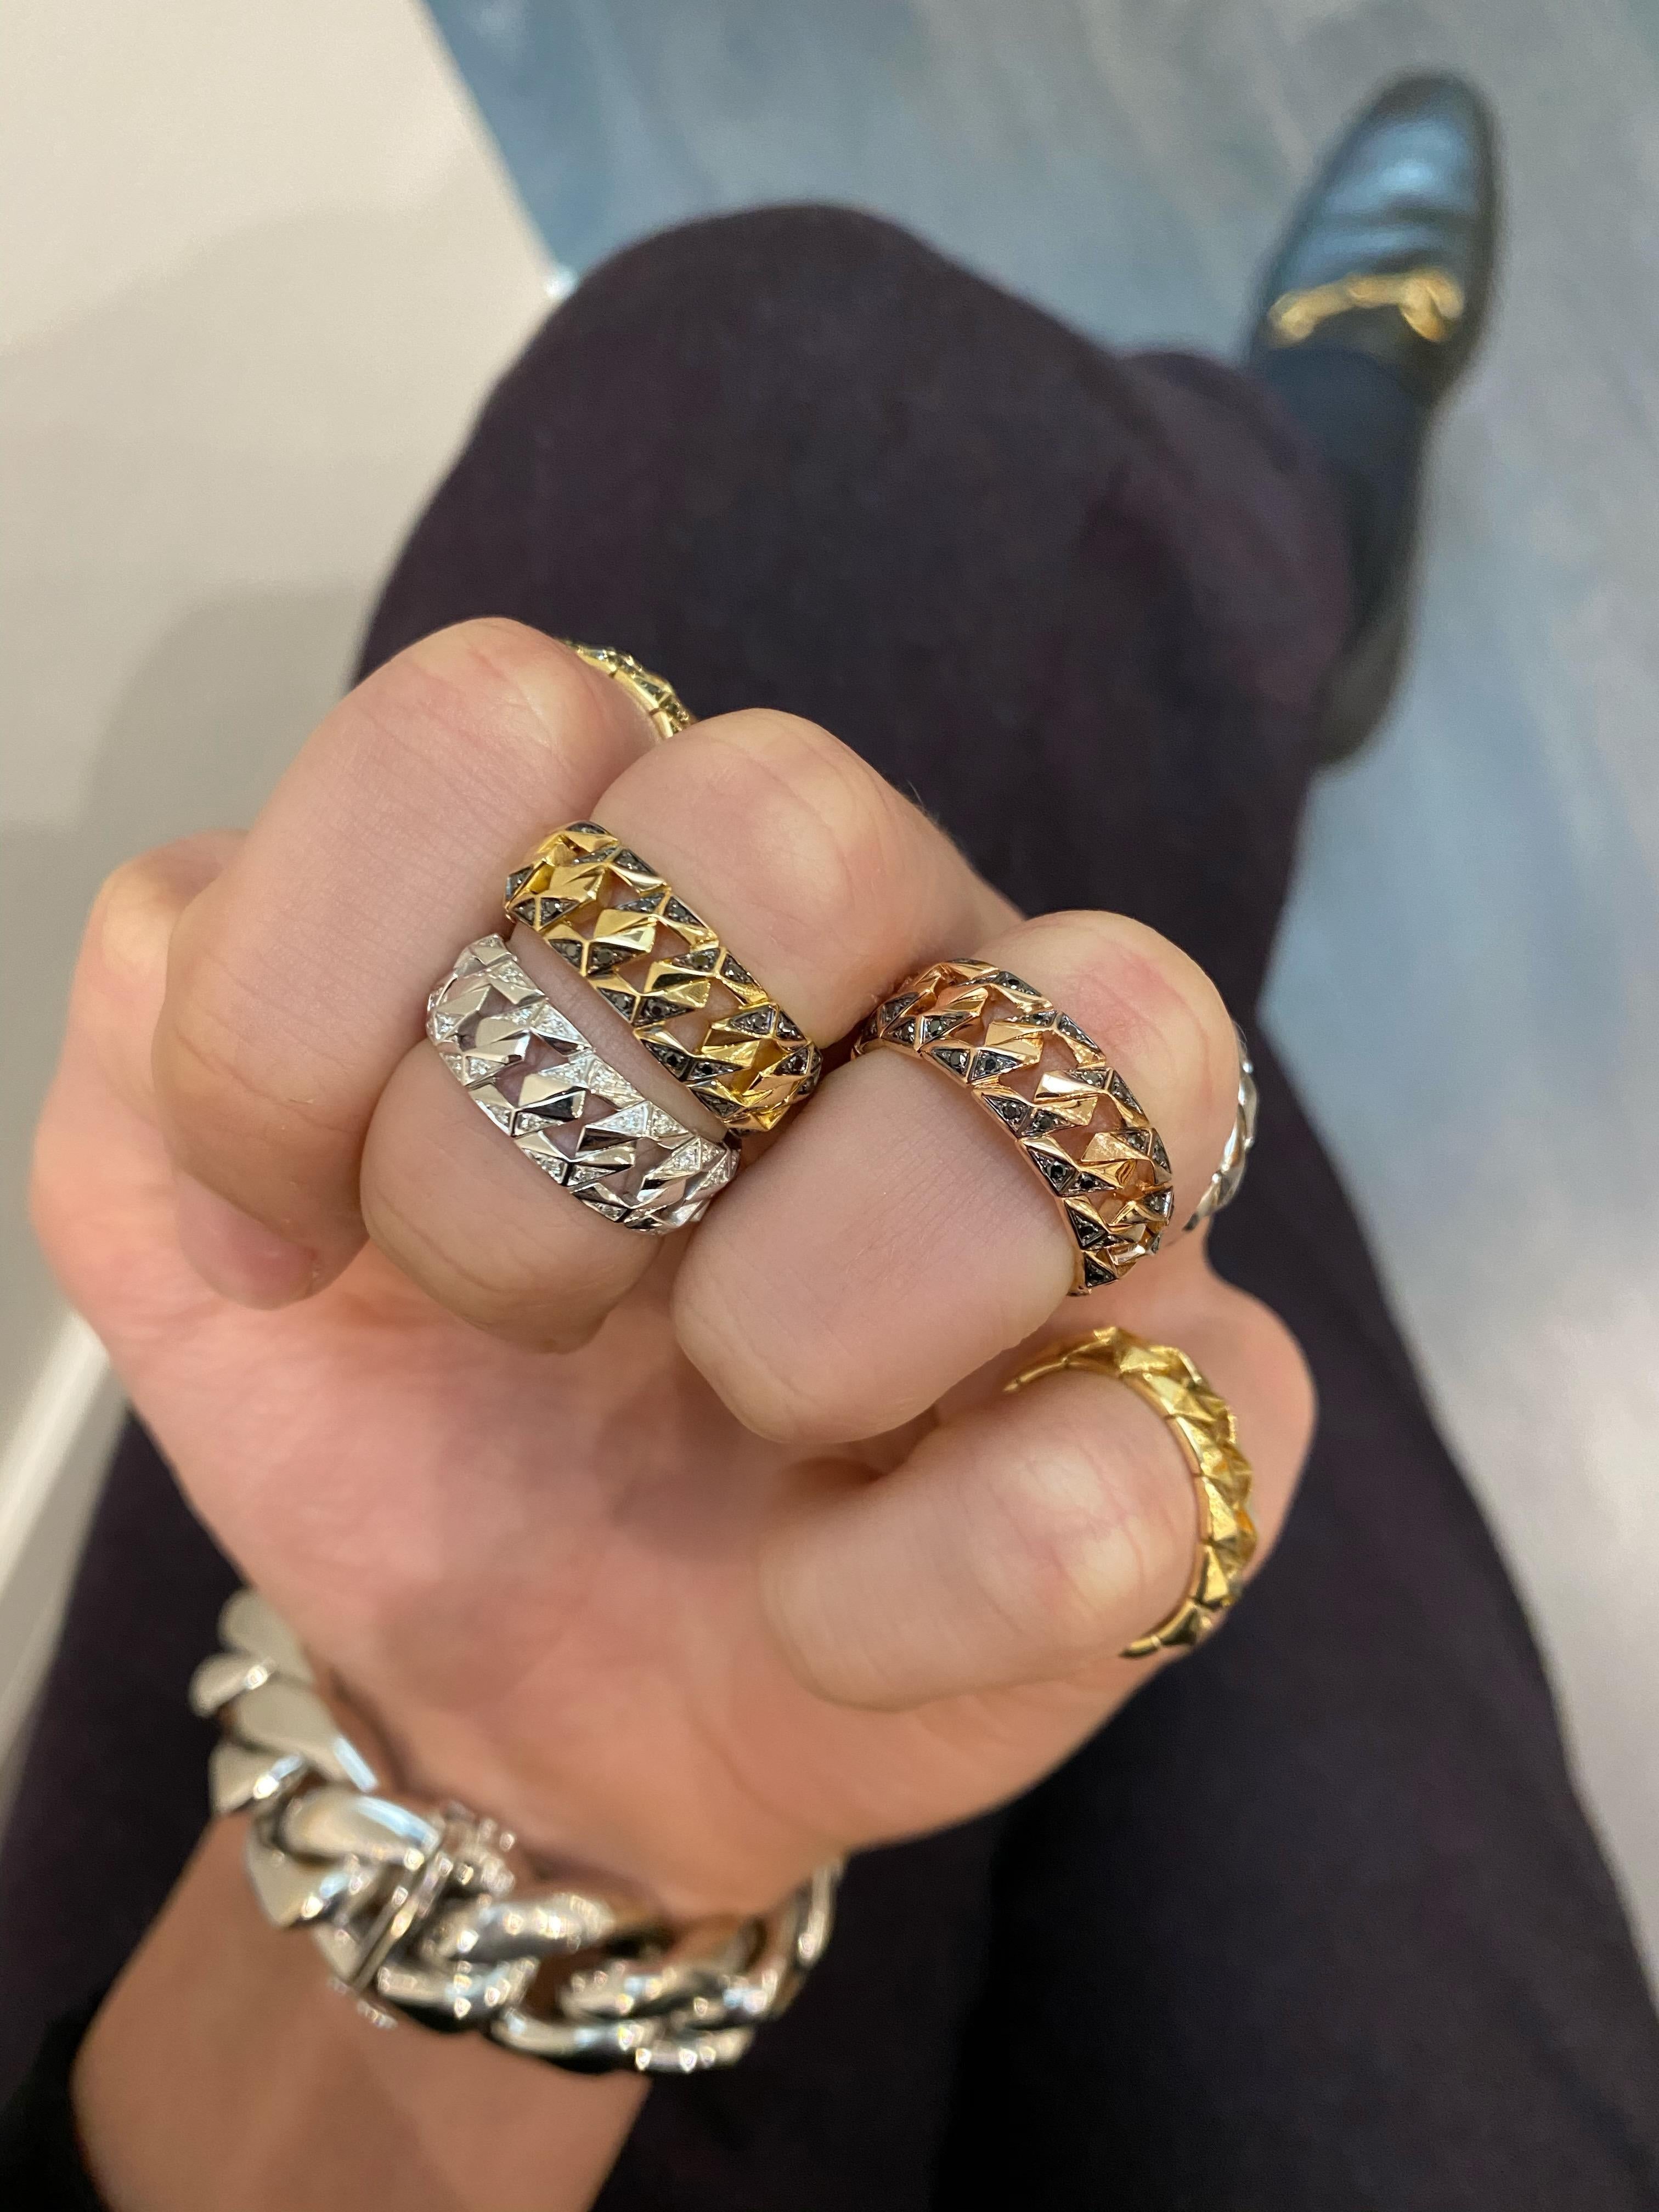 A collection inspired by control, individuality and power.
“If you are ruled by mind you are a king; If by body, a slave”
Rings, handmade in Antwerp, using 18kt gold & natural white diamonds. This ring does not have a regular size. We recommend to